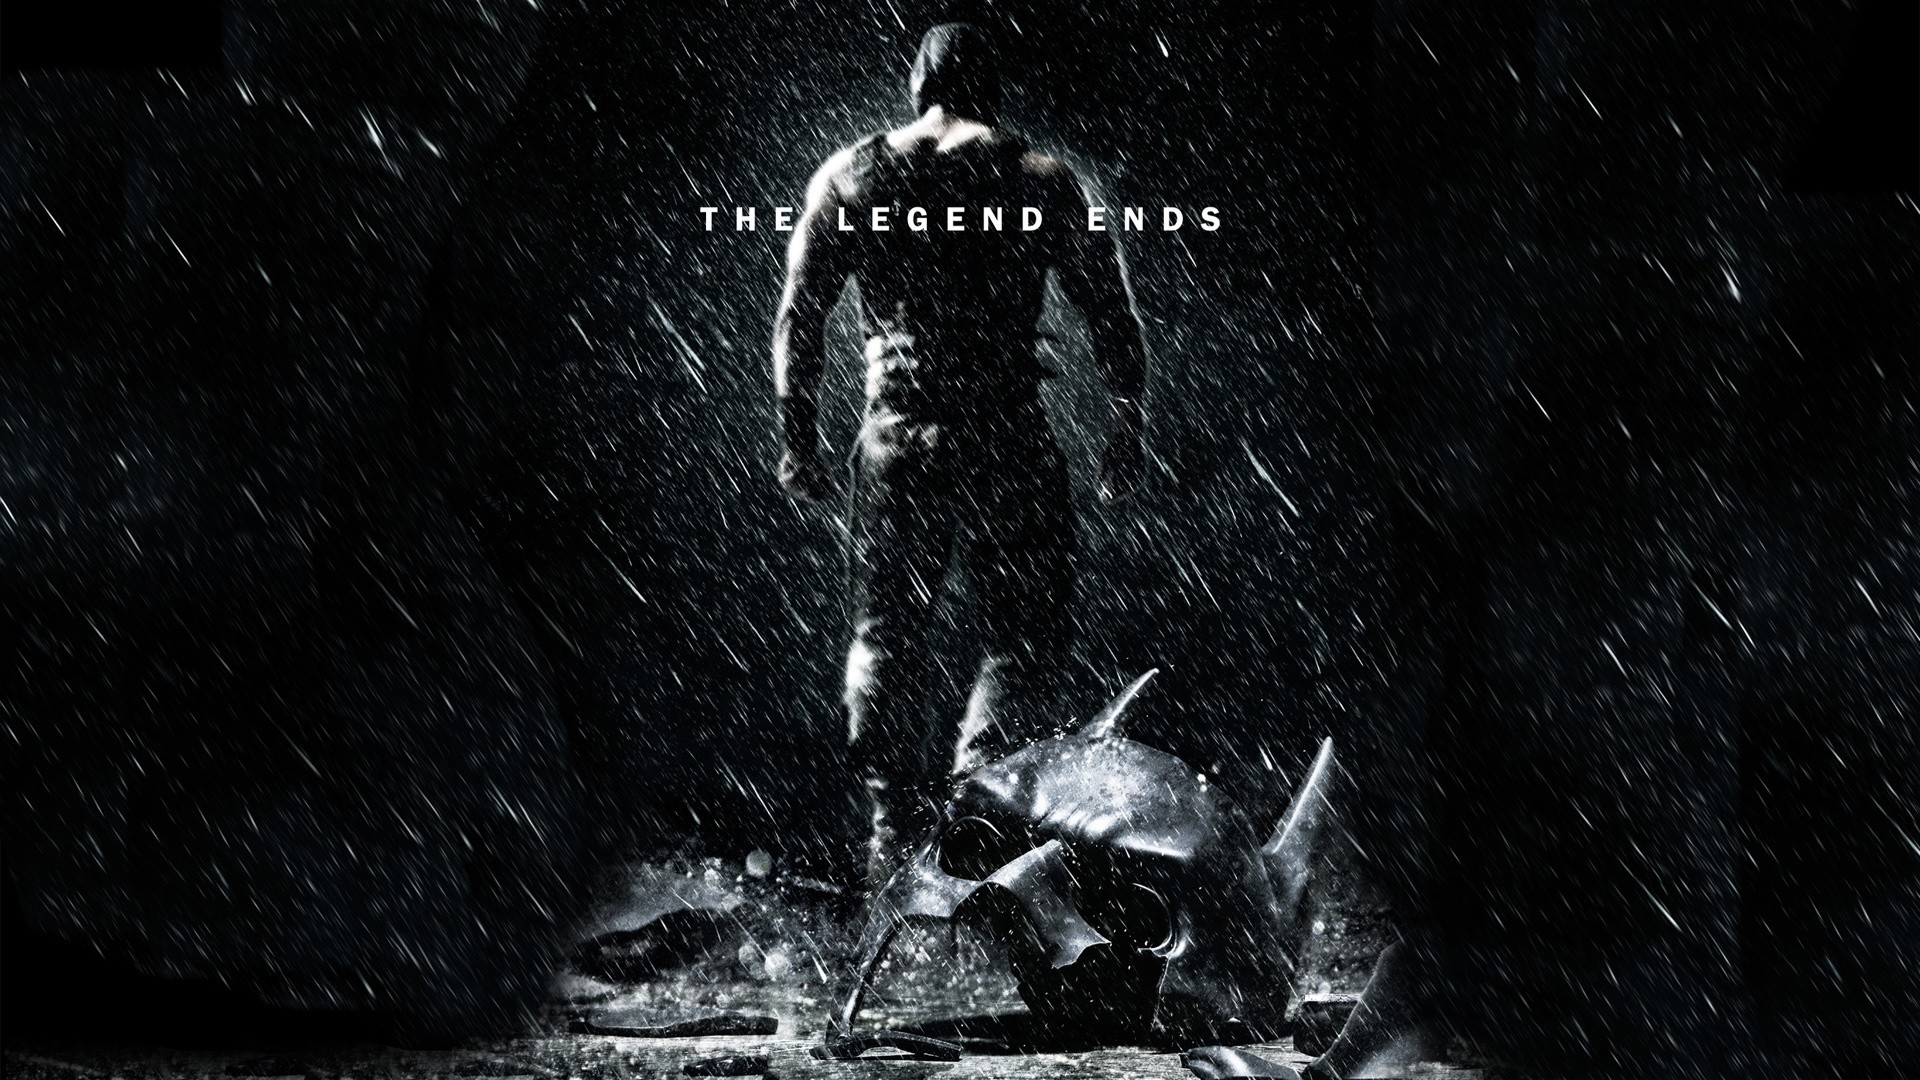 The Dark Knight Rises download the new for ios